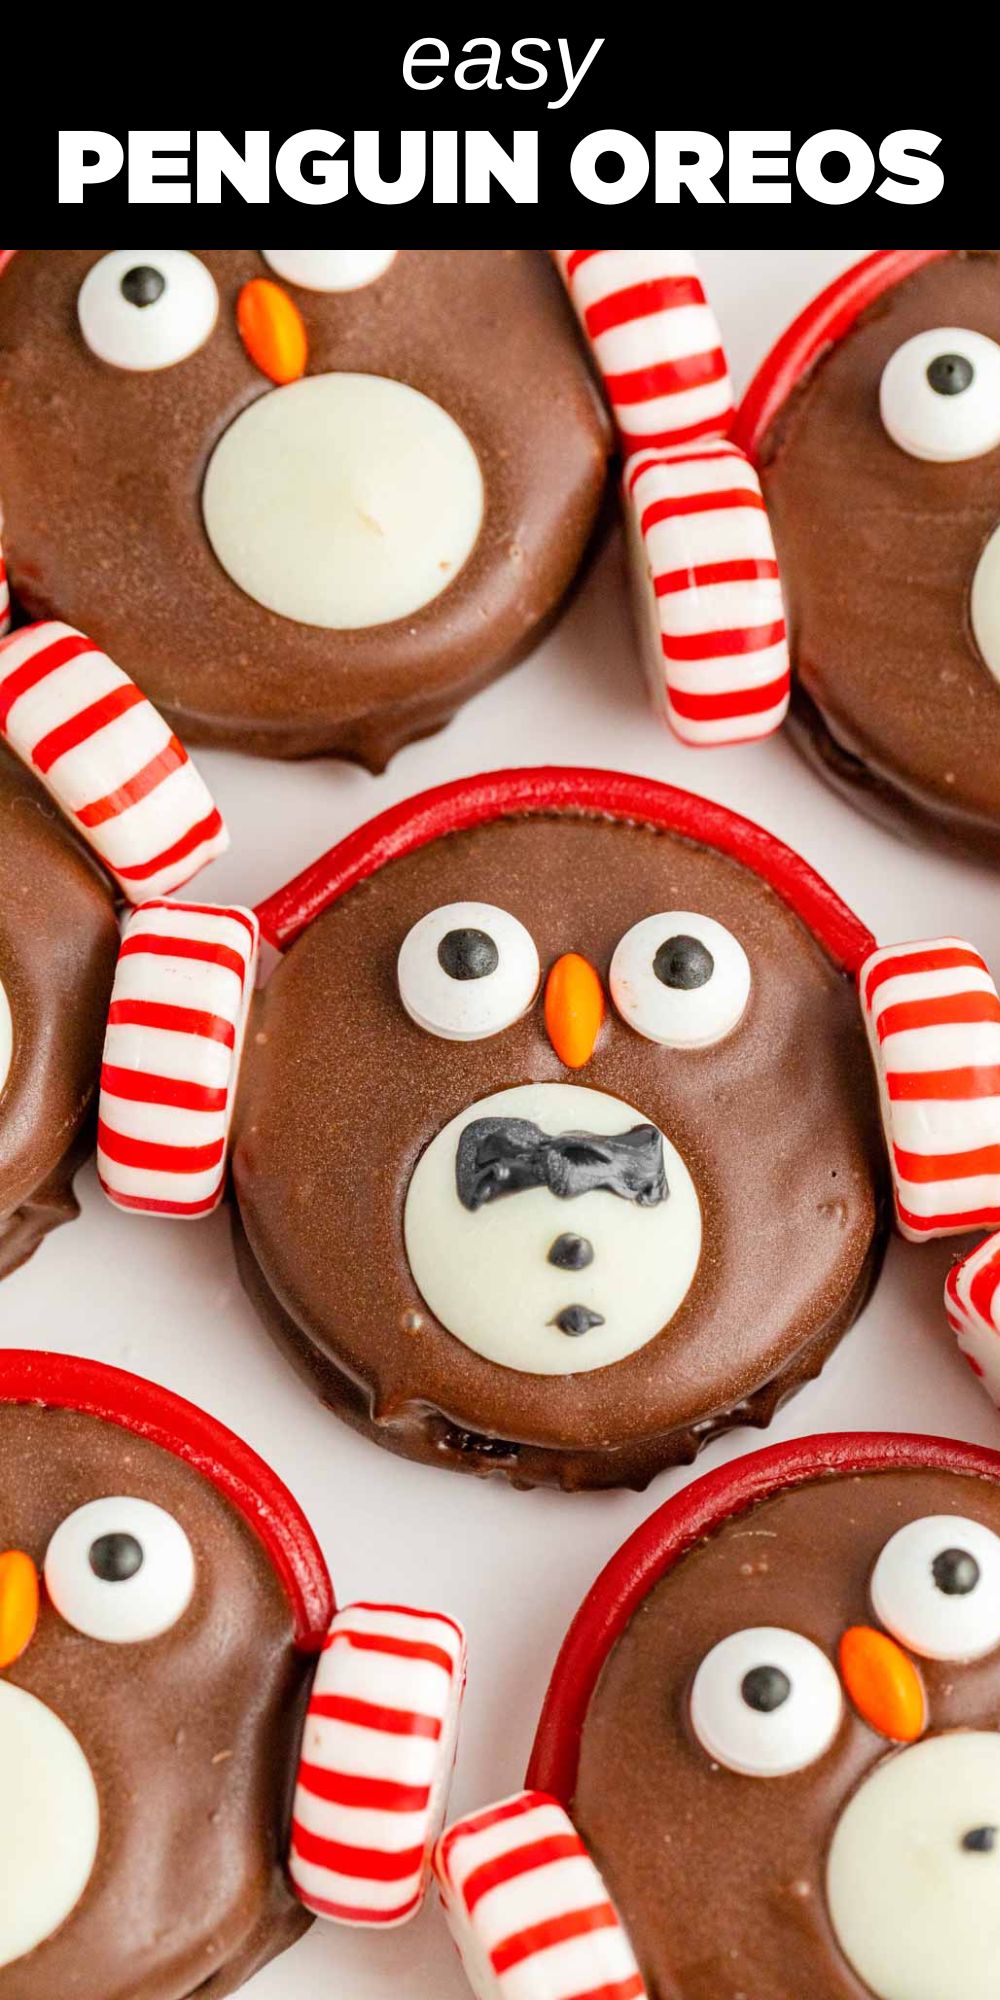 These adorable Oreo penguins are the perfect way to bring some holiday fun to your kitchen. Part recipe and part craft project, these treats use melted chocolate and candy to turn everyone’s favorite sandwich cookie into cute little penguins that are perfect for any holiday party.